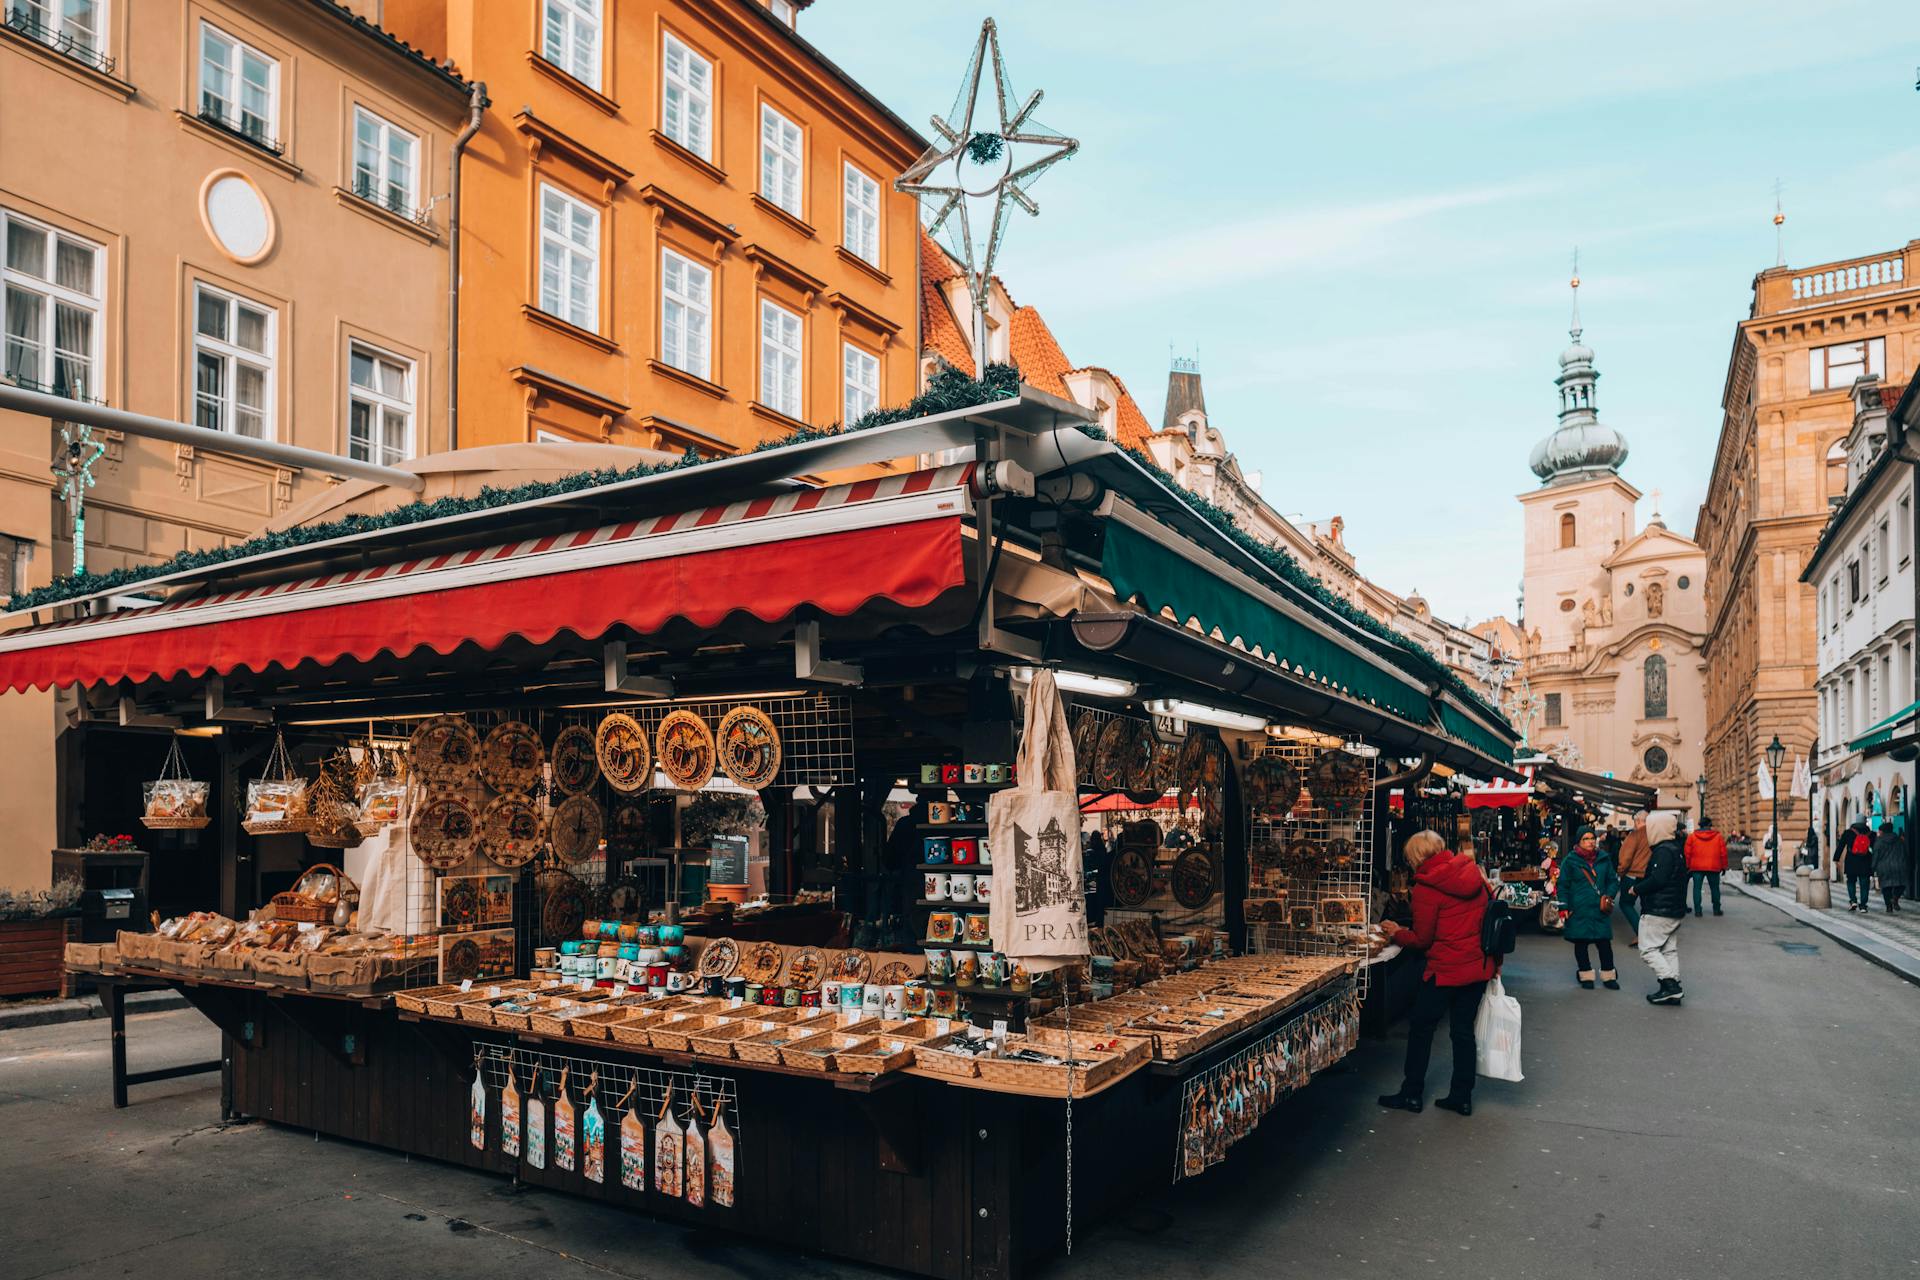 A souvenir stand in the city | Source: Pexels